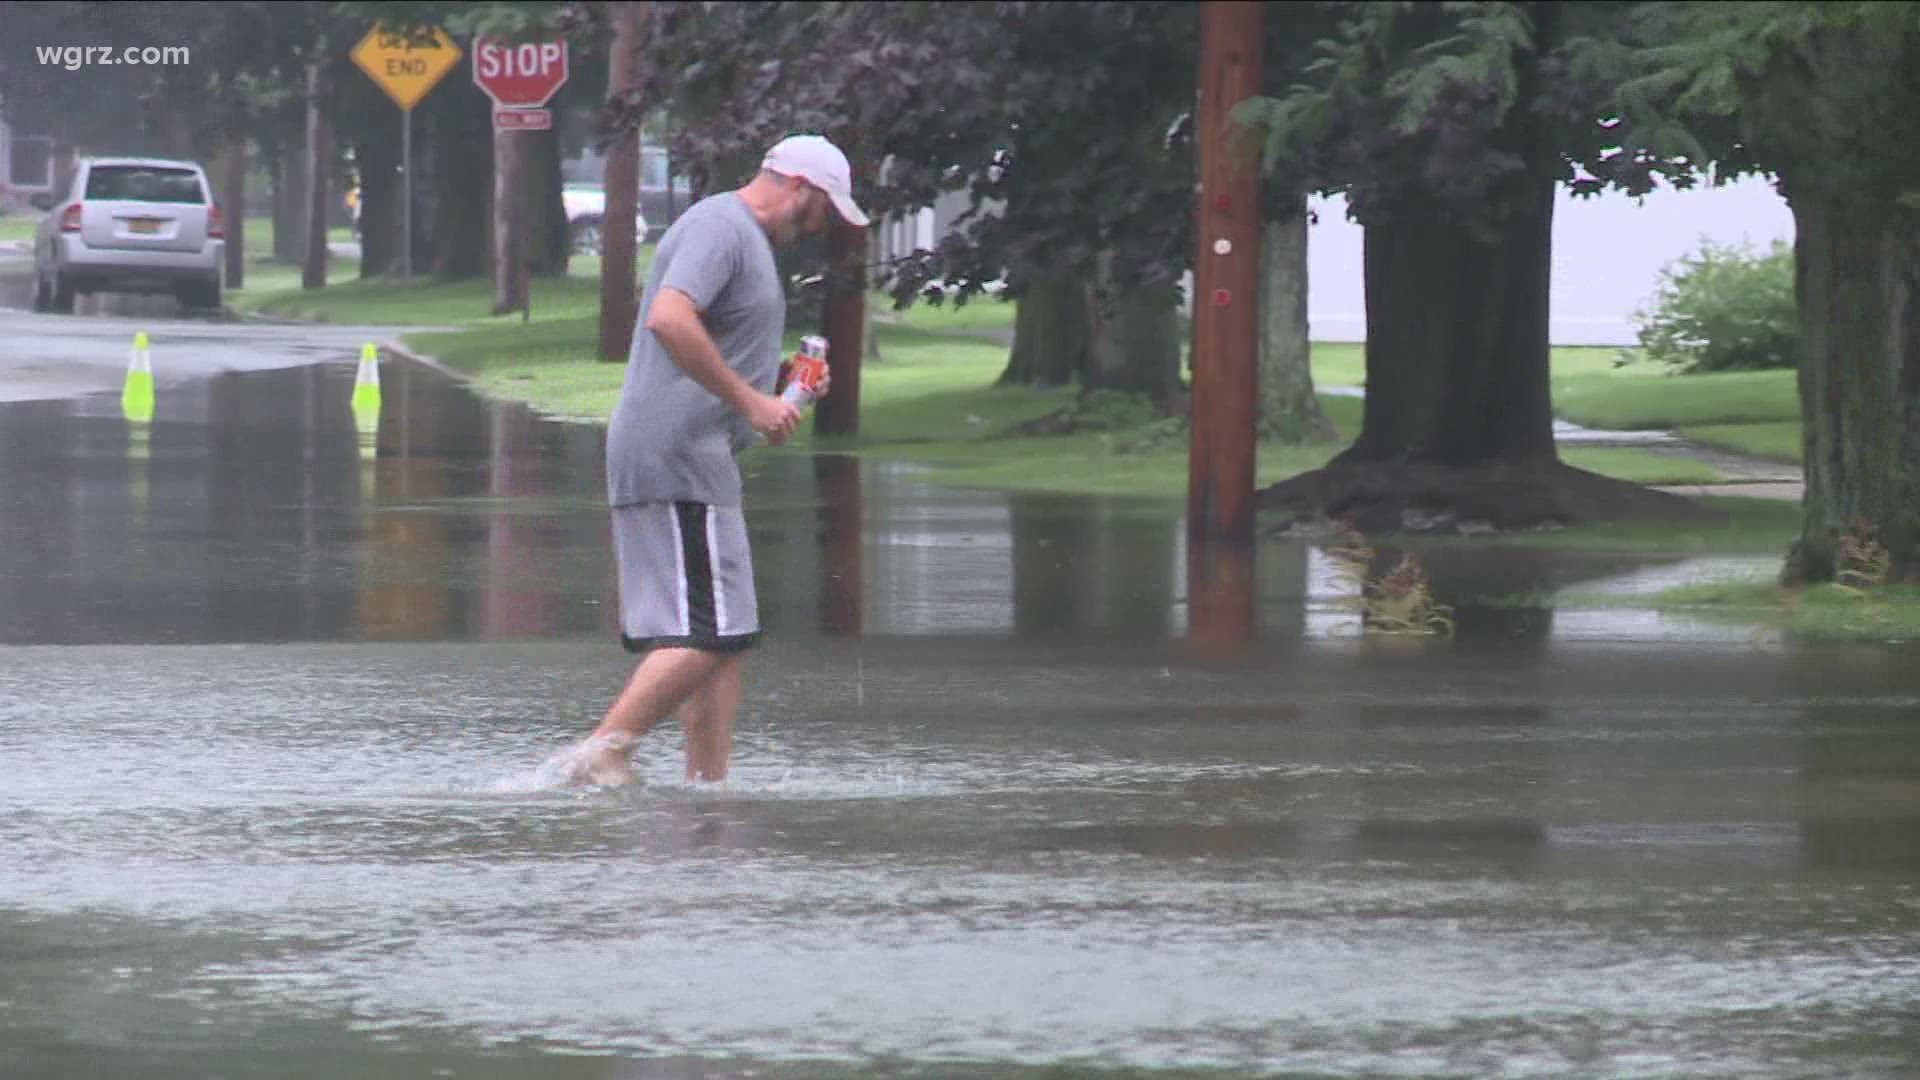 The Northtowns saw major roadways like Niagara Falls Boulevard and Sheridan Drive, even the 290 entrance was inundated with water earlier today.